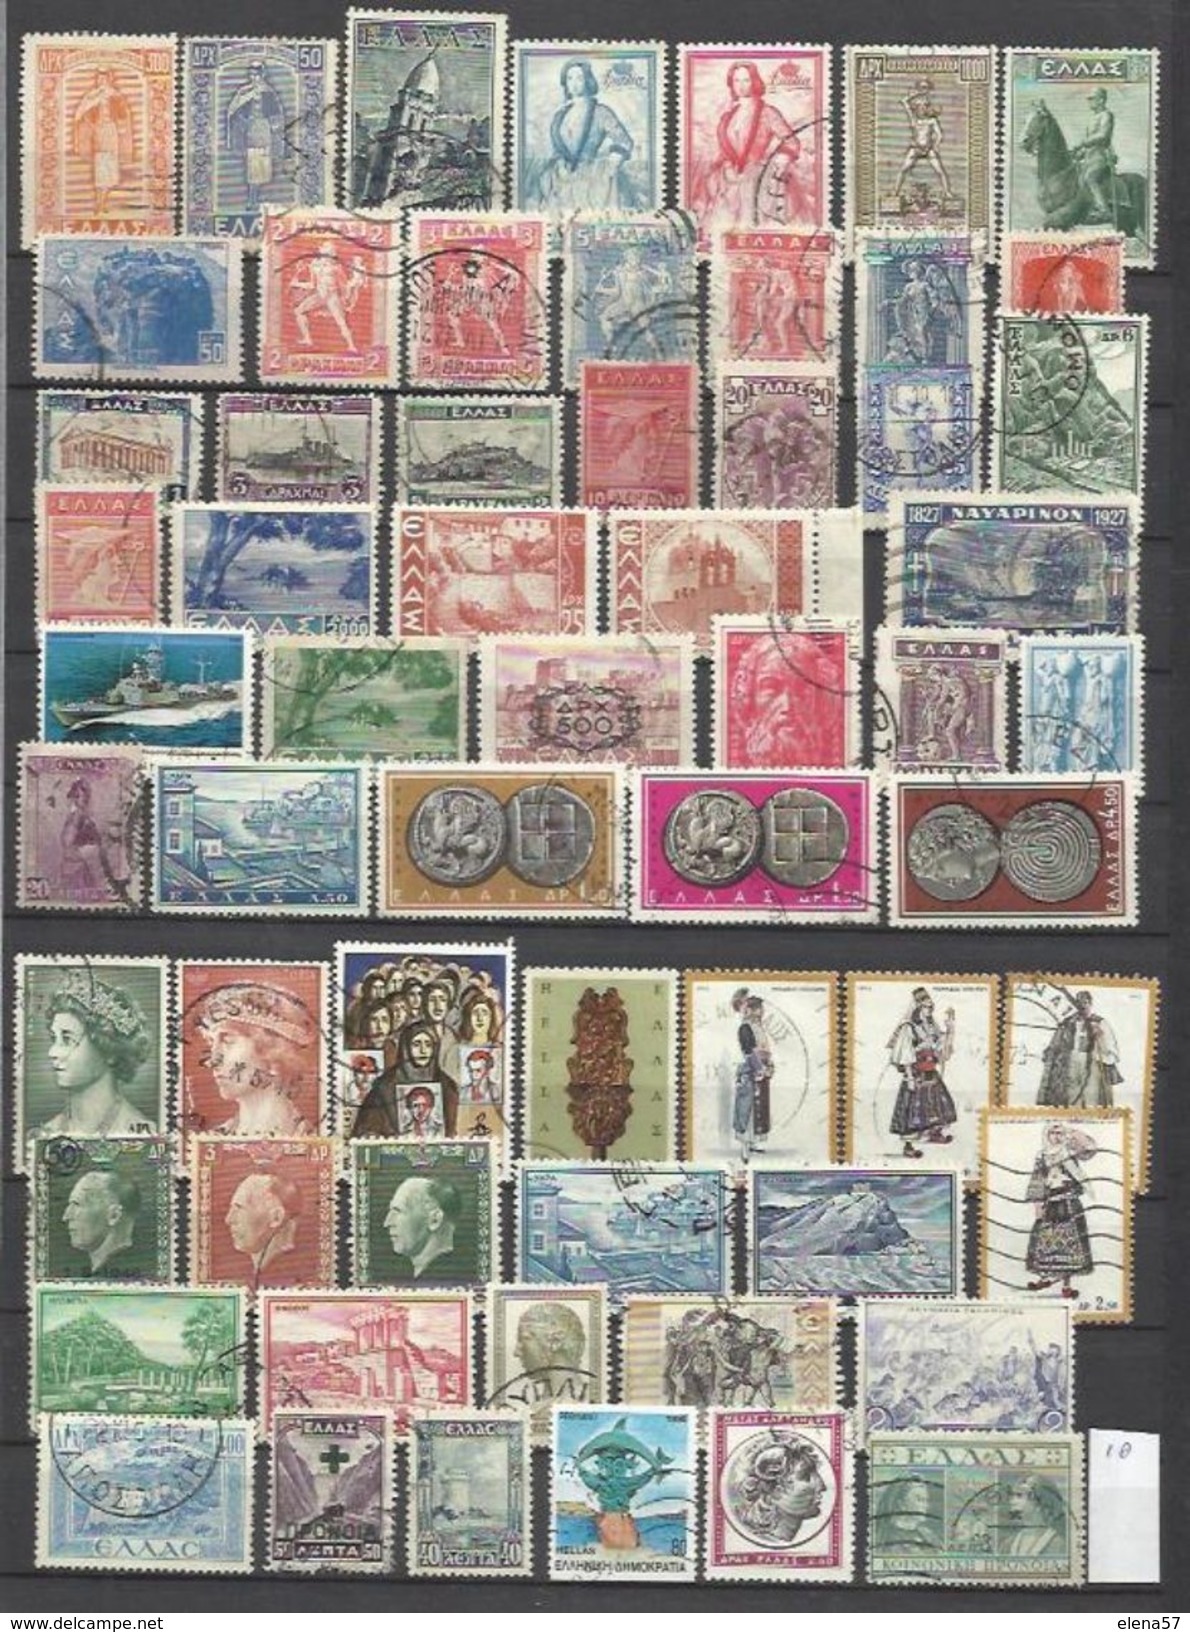 G258-LOTE SELLOS GRECIA SIN TASAR,SIN REPETIDOS,ESCASOS.GREECE STAMPS LOT WITHOUT PRICING WITHOUT REPEATEDGRIECHENLAND - Collections